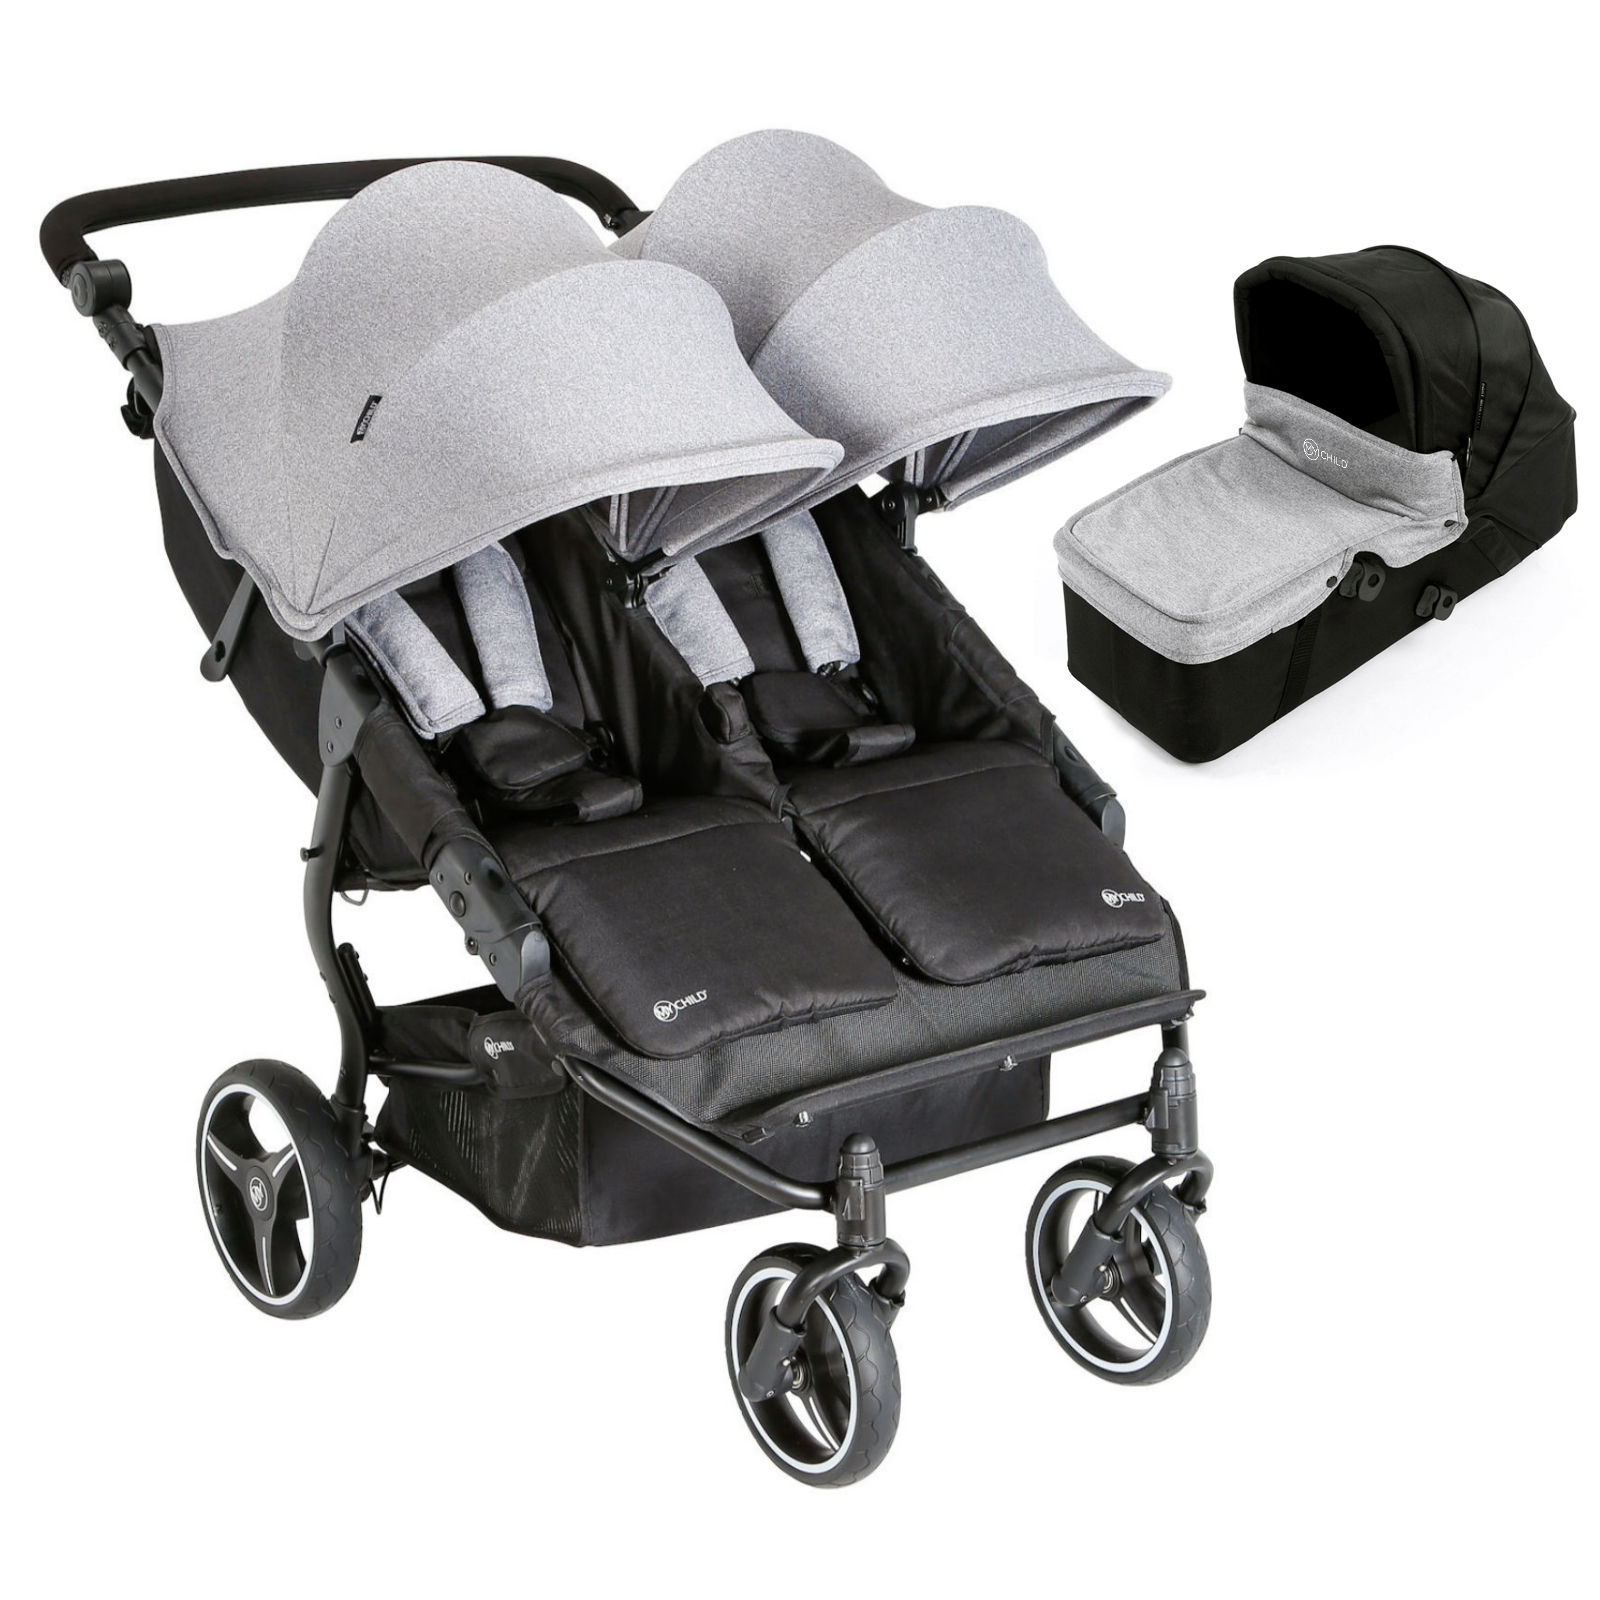 Carrycot stroller